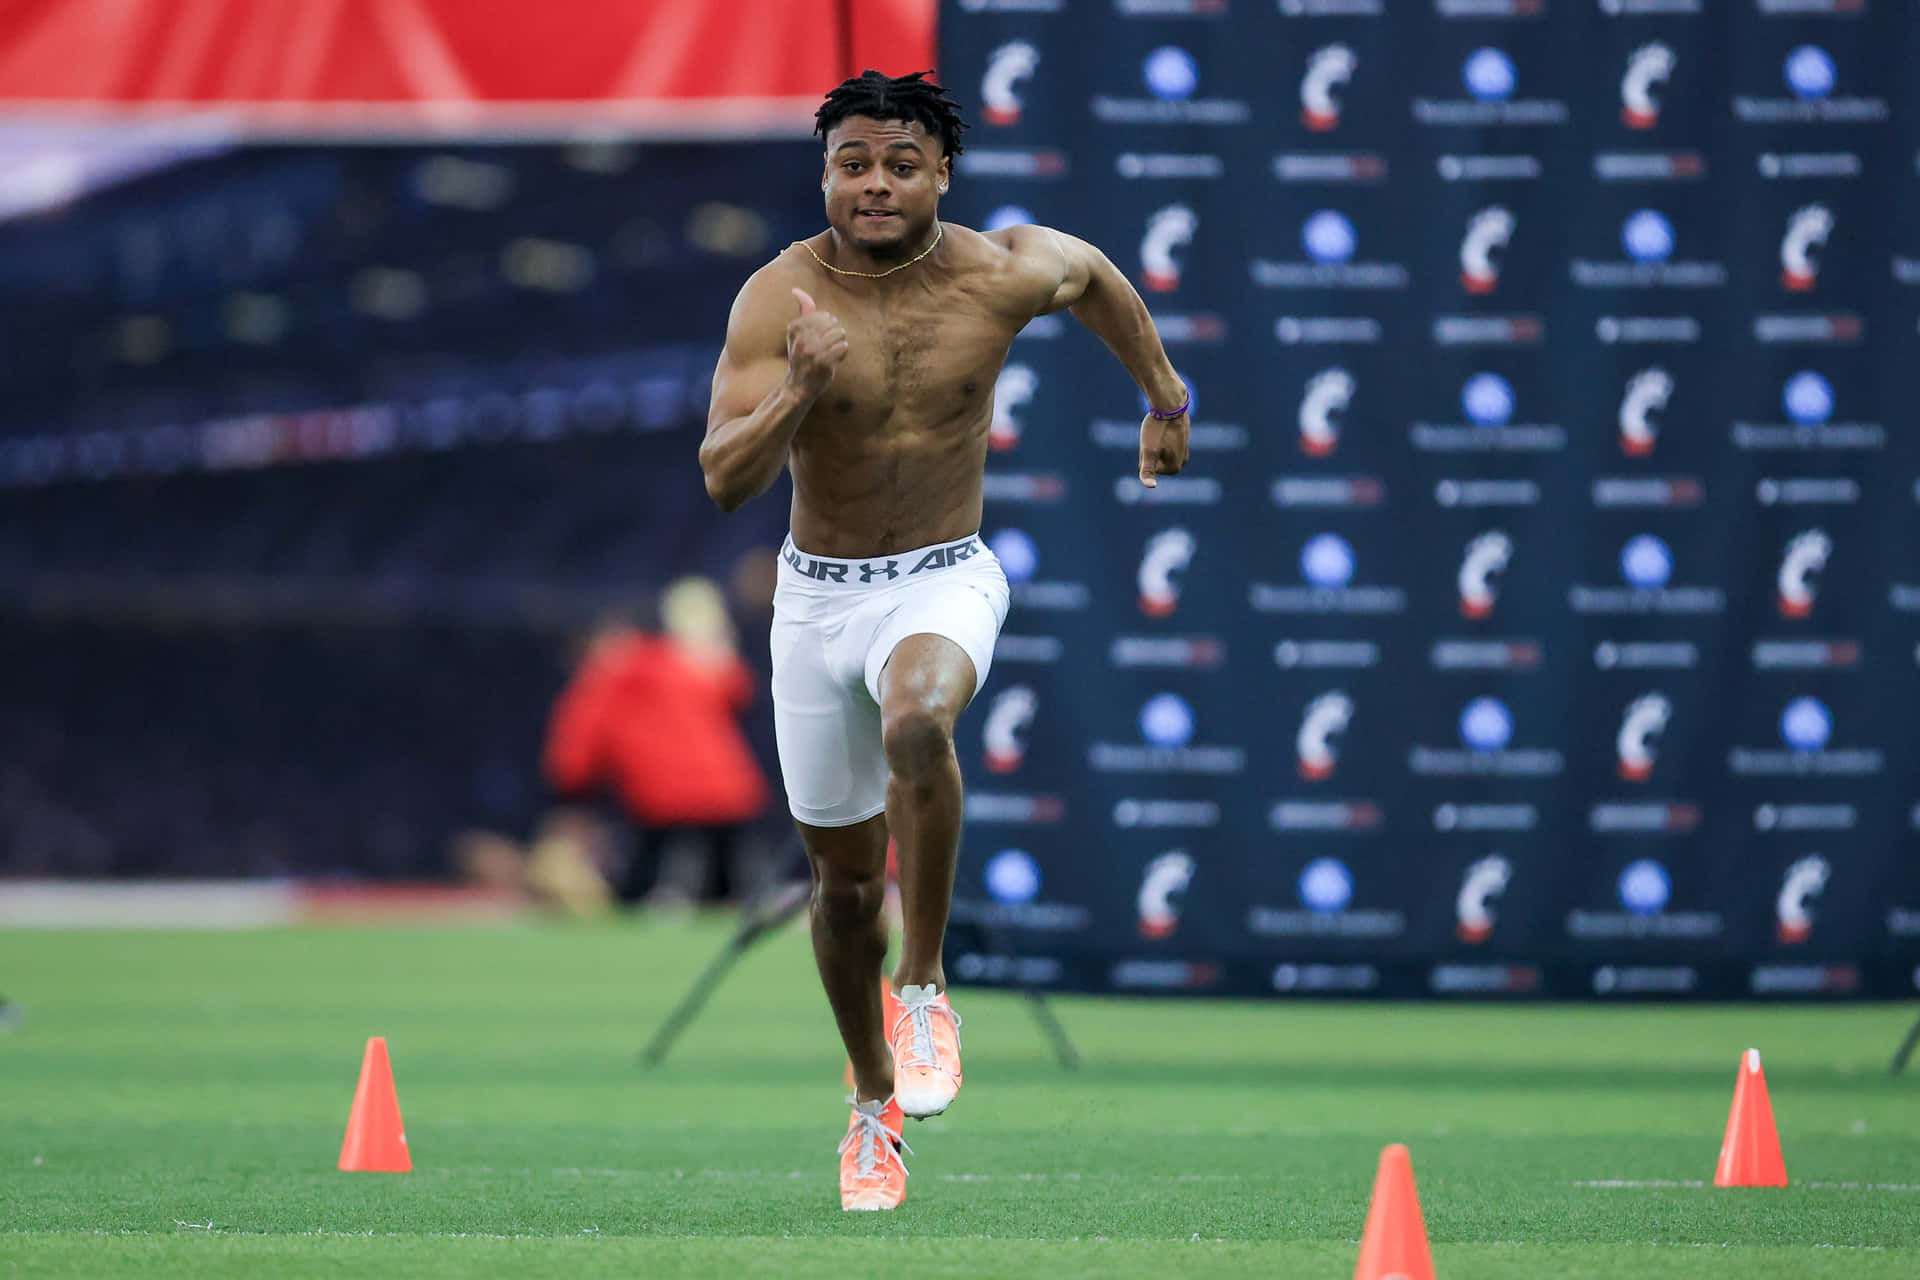 Athlete Sprinting During Combine Event Wallpaper